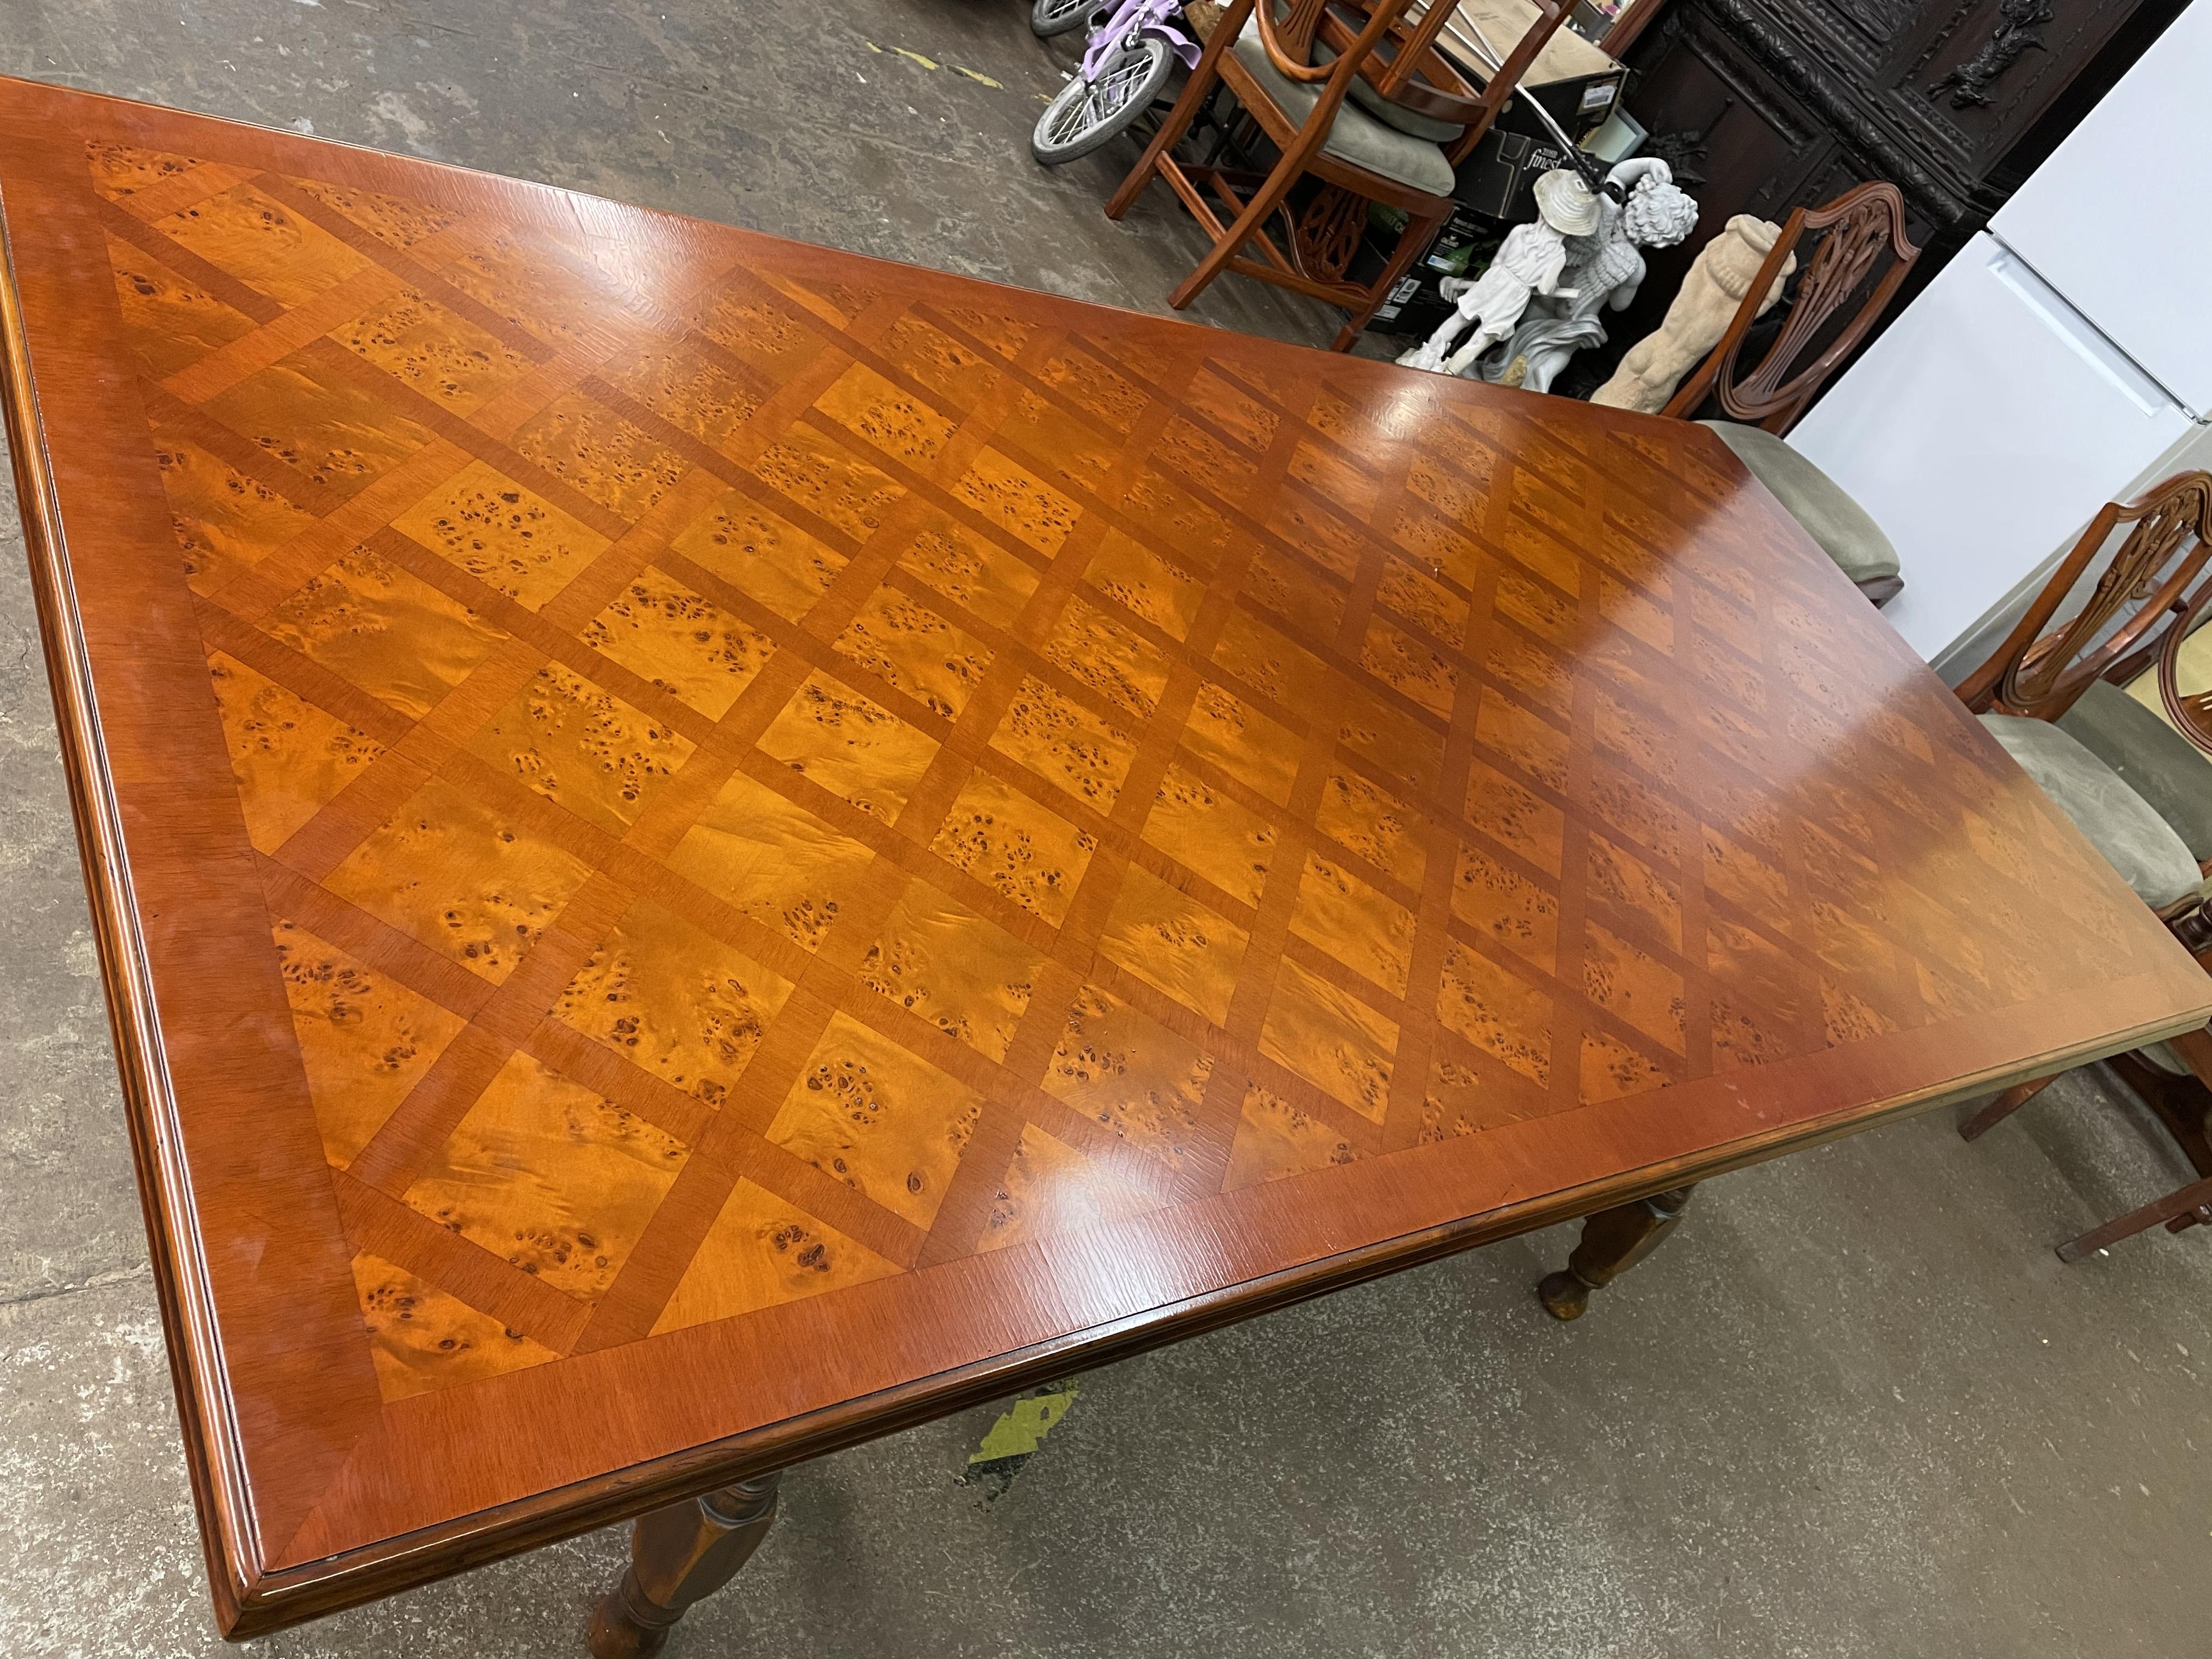 SPANISH INFLUENCE WALNUT AND PARQUETRY TOPPED OBLONG DINING TABLE WITH SCROLL METAL WORK STRETCHERS - Image 11 of 12